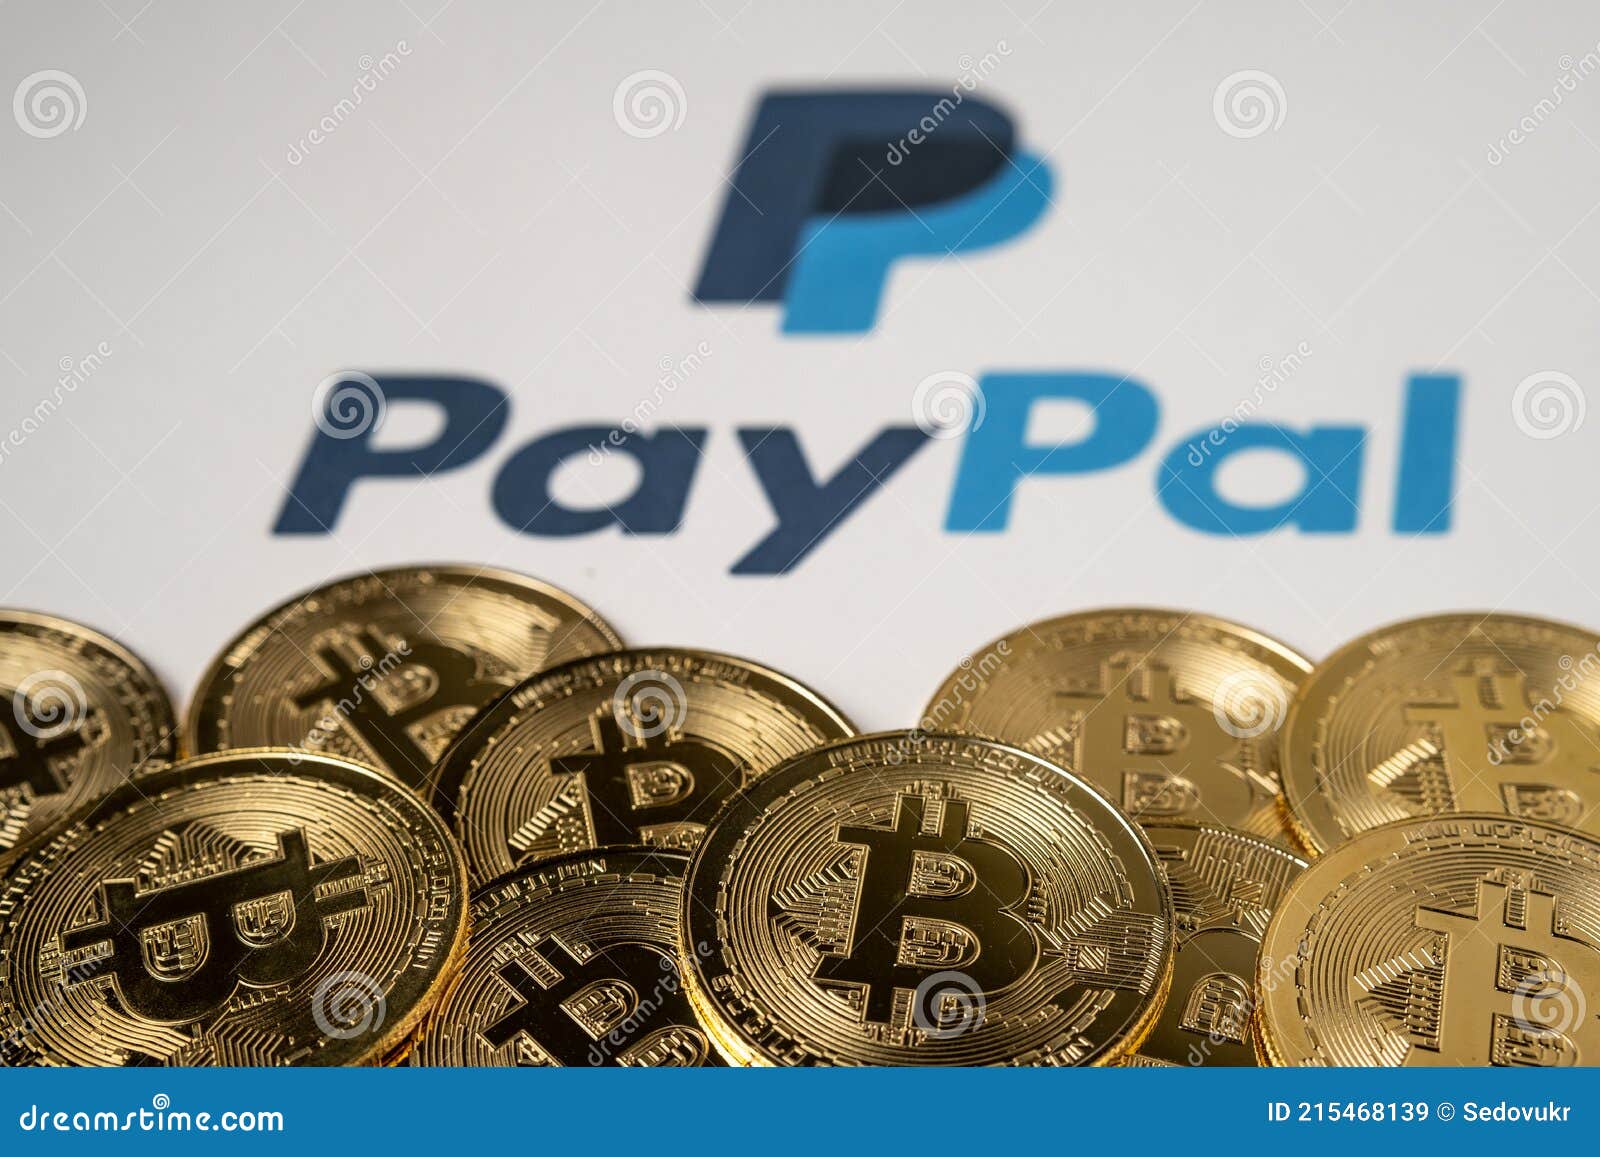 Buy RANK D (Profile Background) from Steam  Payment from PayPal,  Webmoney, BitCoin (BTC)